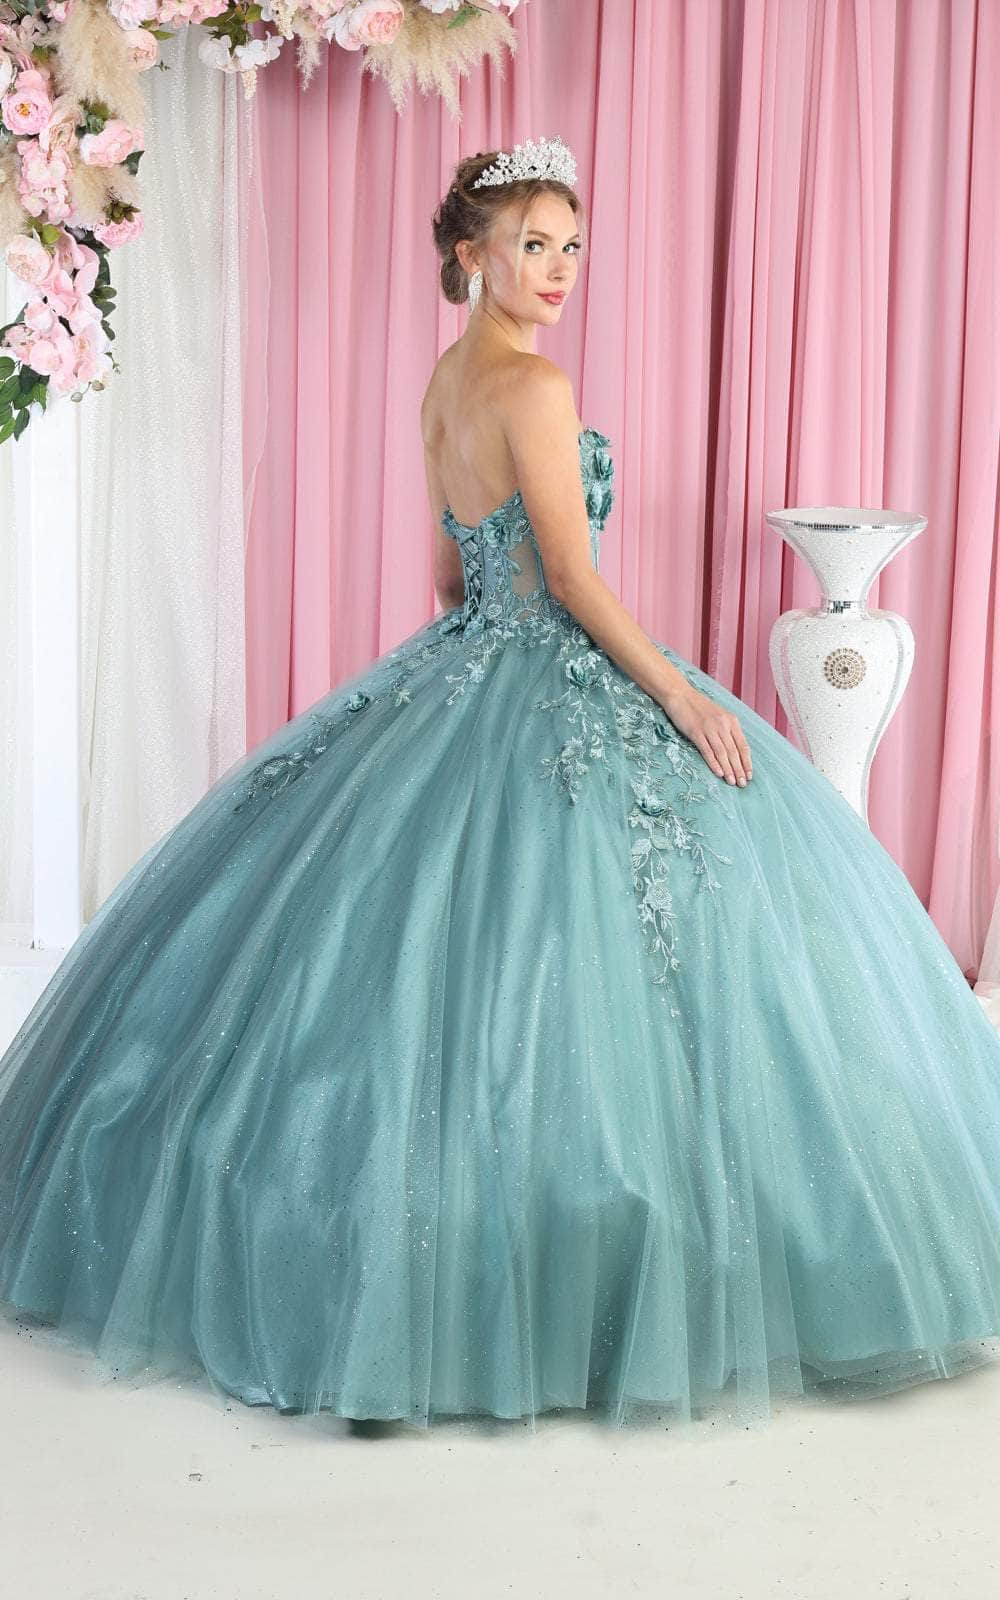 May Queen LK188 - Lace-Up Tie Corset Bodice Ballgown Ball Gowns 4 